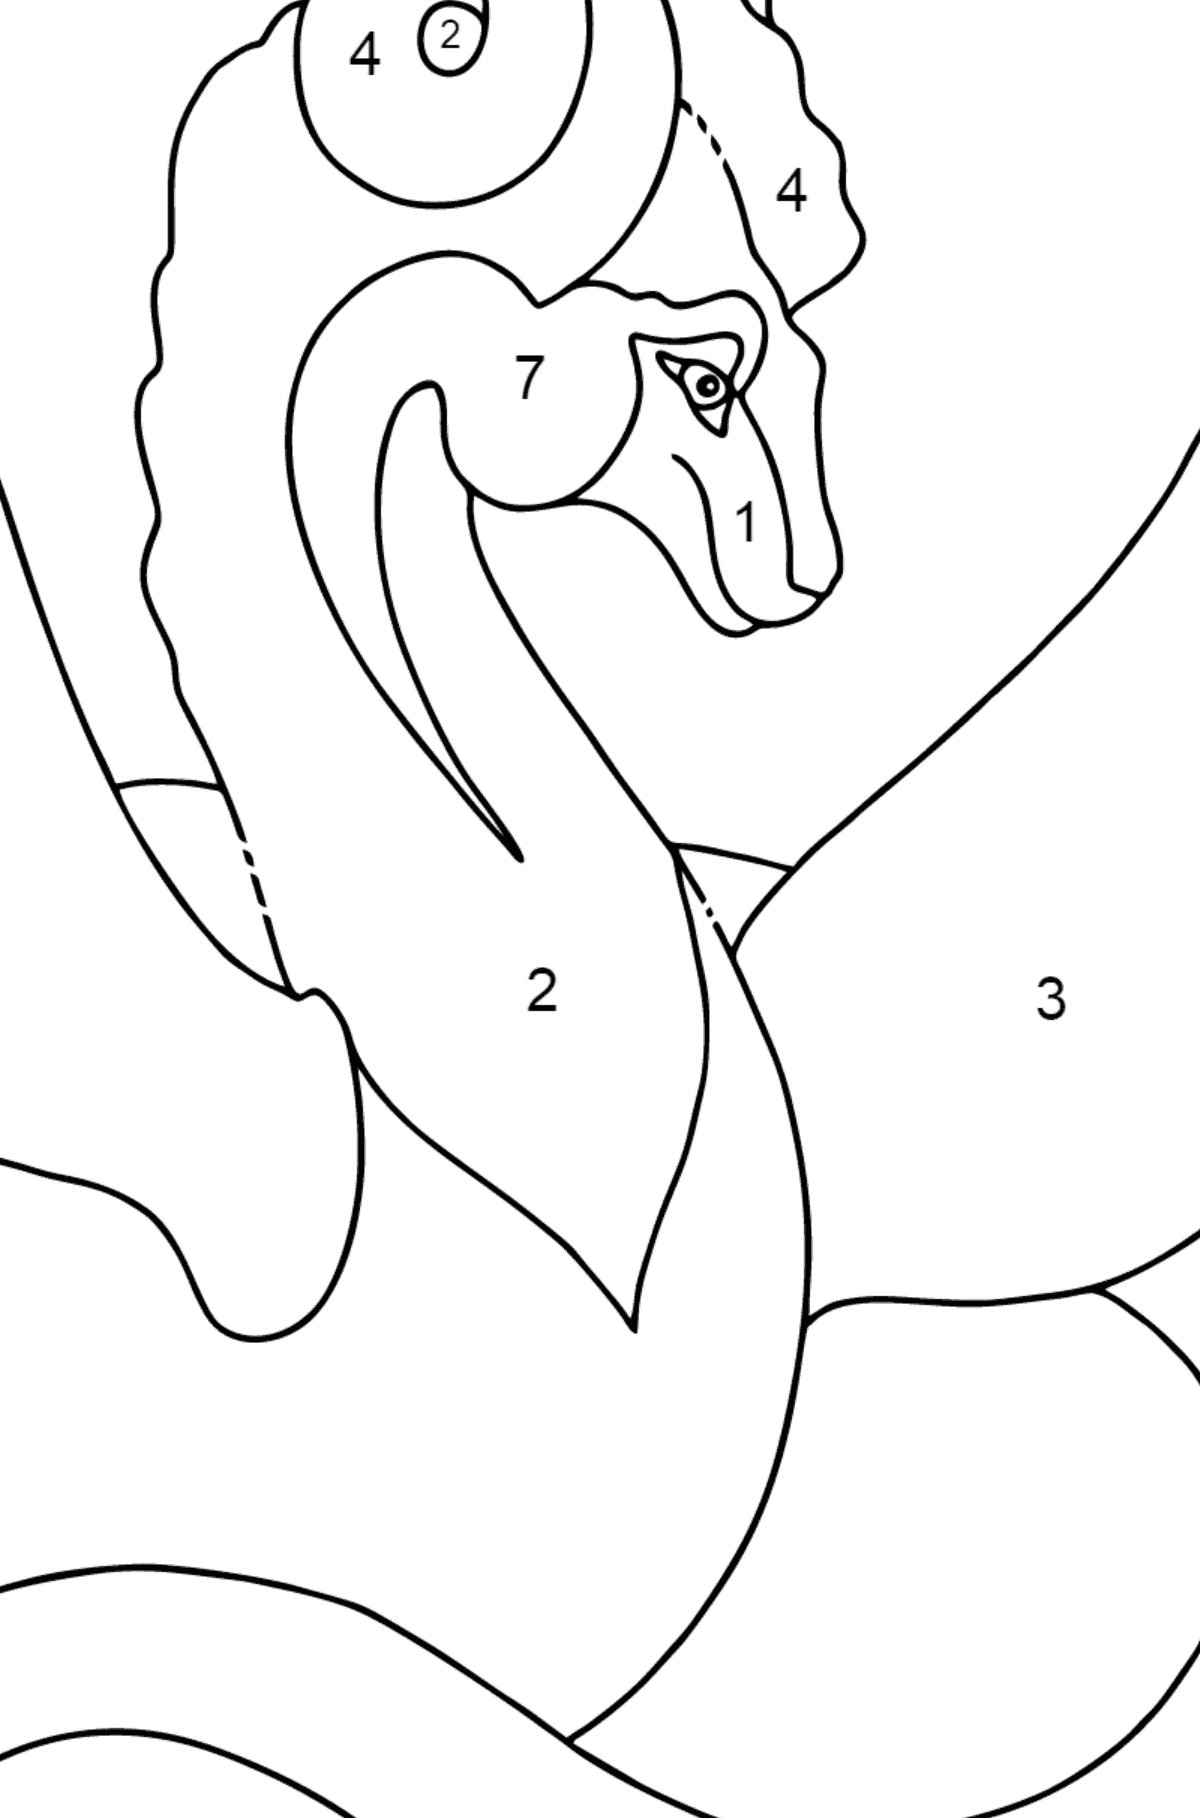 Cute Dragon Coloring Page (simple) - Coloring by Numbers for Kids